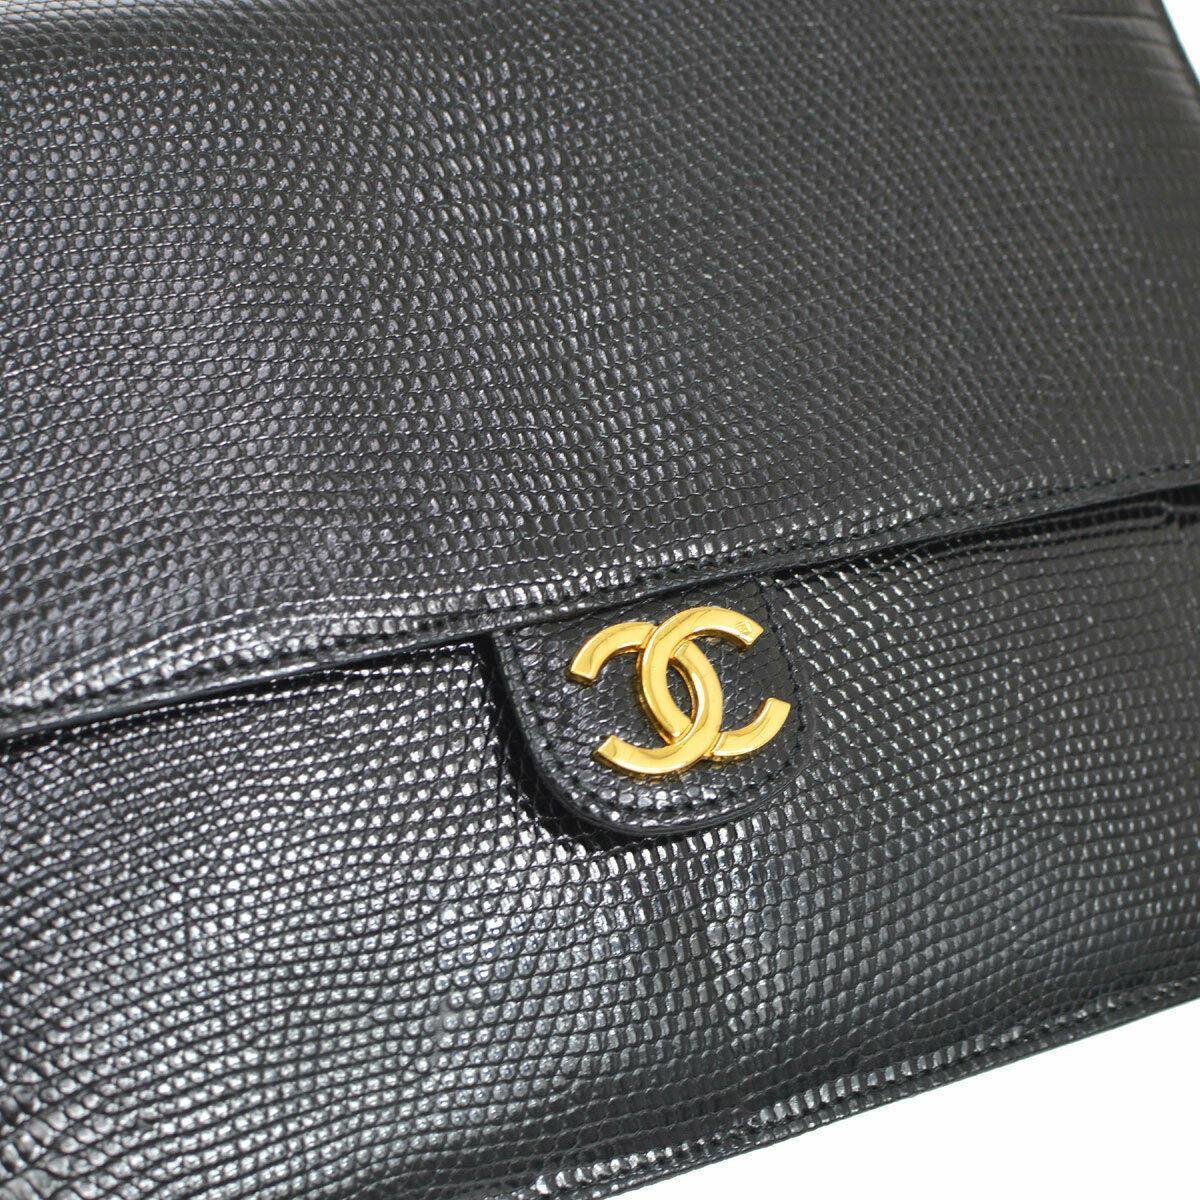 Chanel Black Exotic Lizard Leather Gold Evening Small Shoulder Flap Bag

Lizard
Leather
Leather lining
Gold tone hardware
Measures 9.5